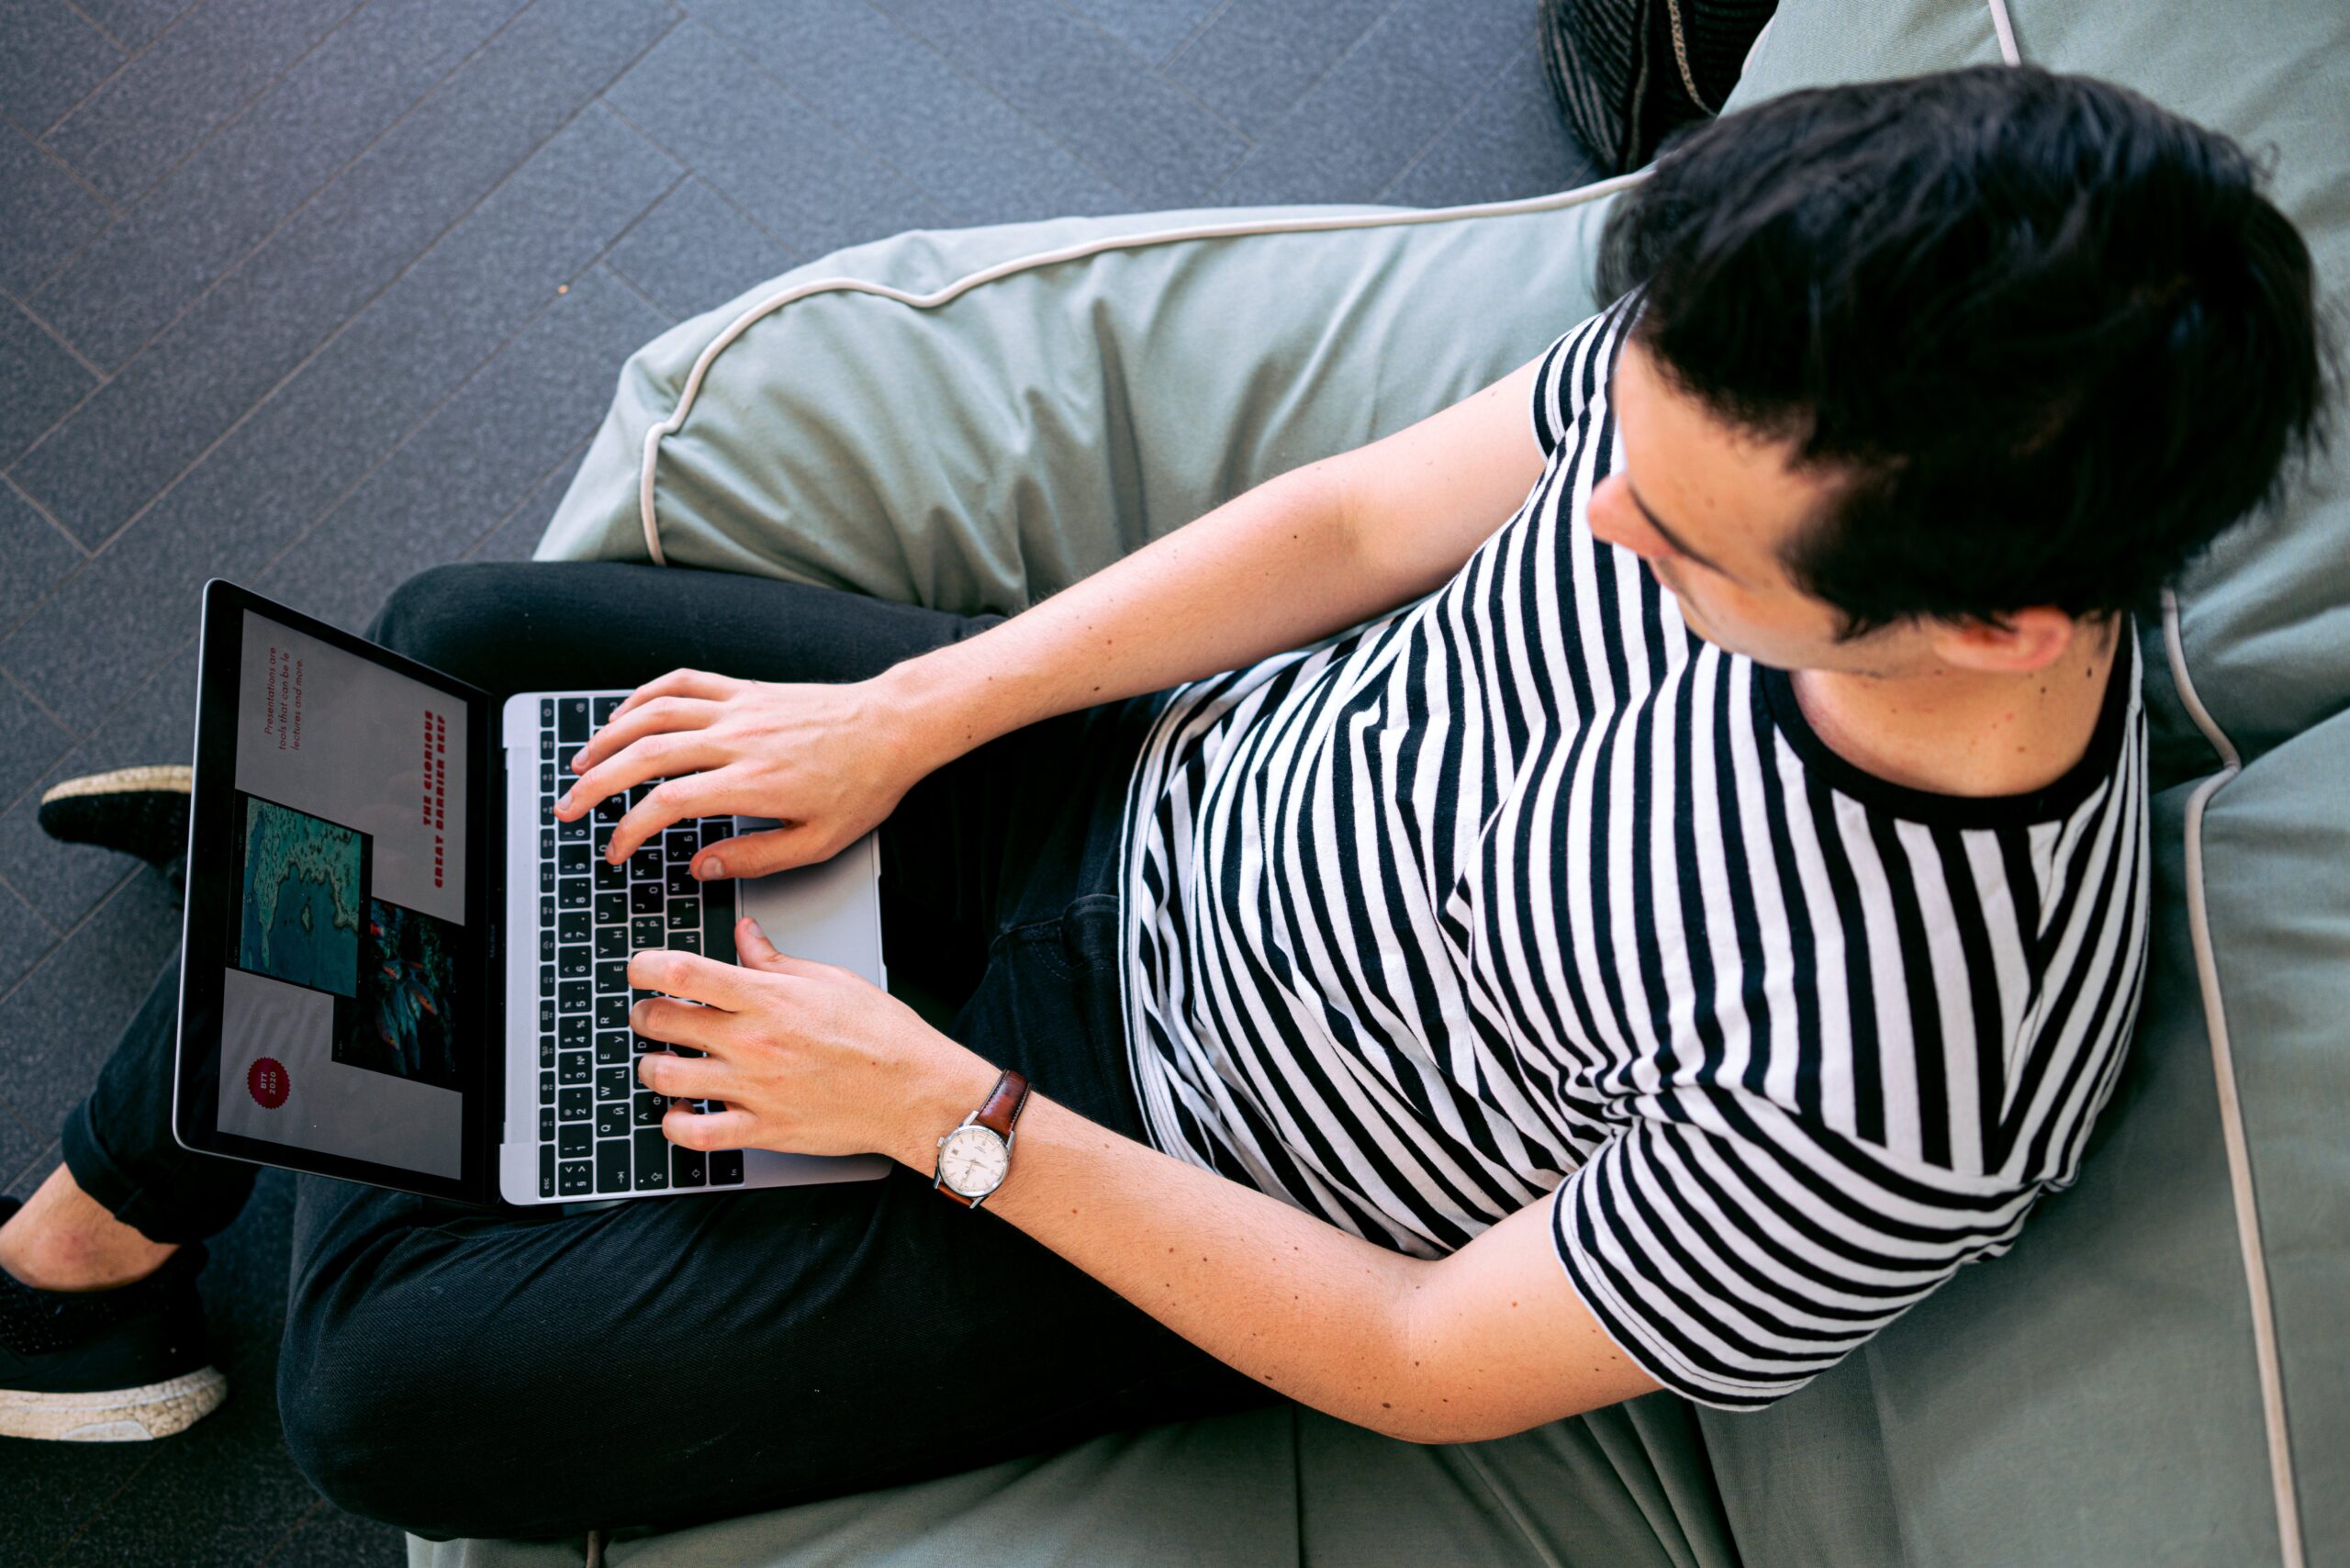 Man in a striped shirt sitting on a couch and using a laptop